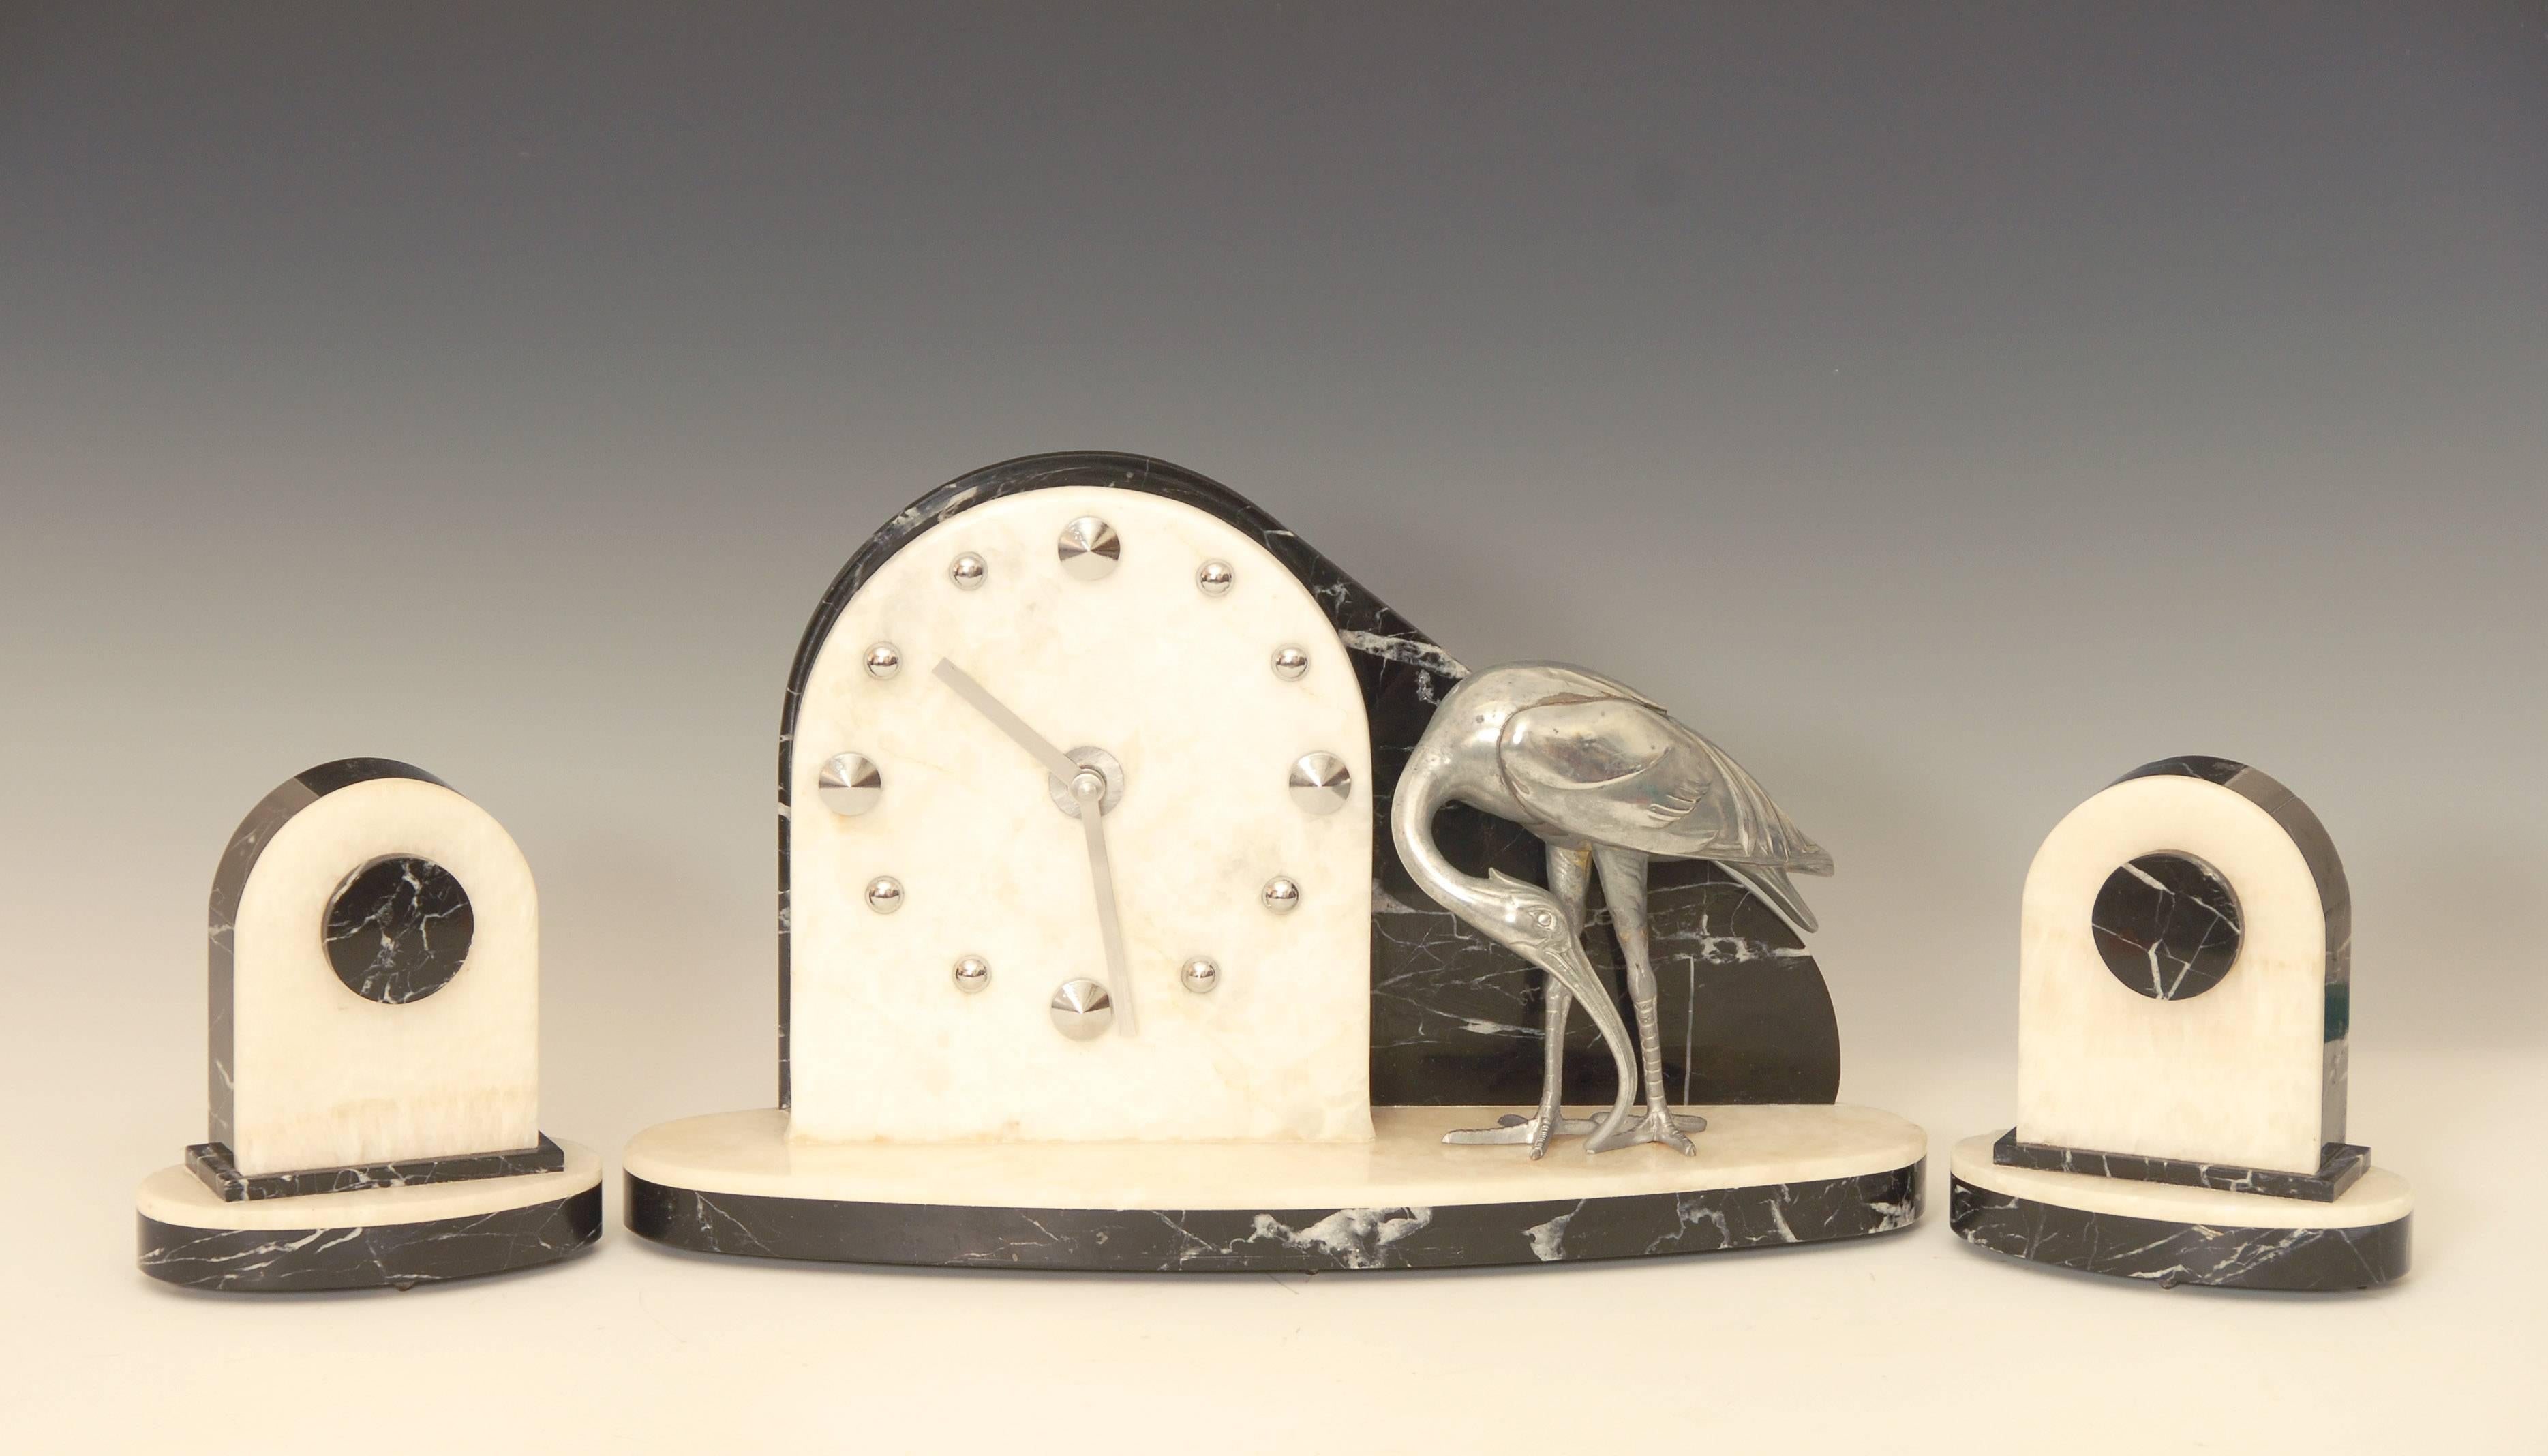 Fabulous Art Deco marble clock with white metal stork and matching marble garnitures.
Converted to battery power so keeps perfect time and does not need to be wound.